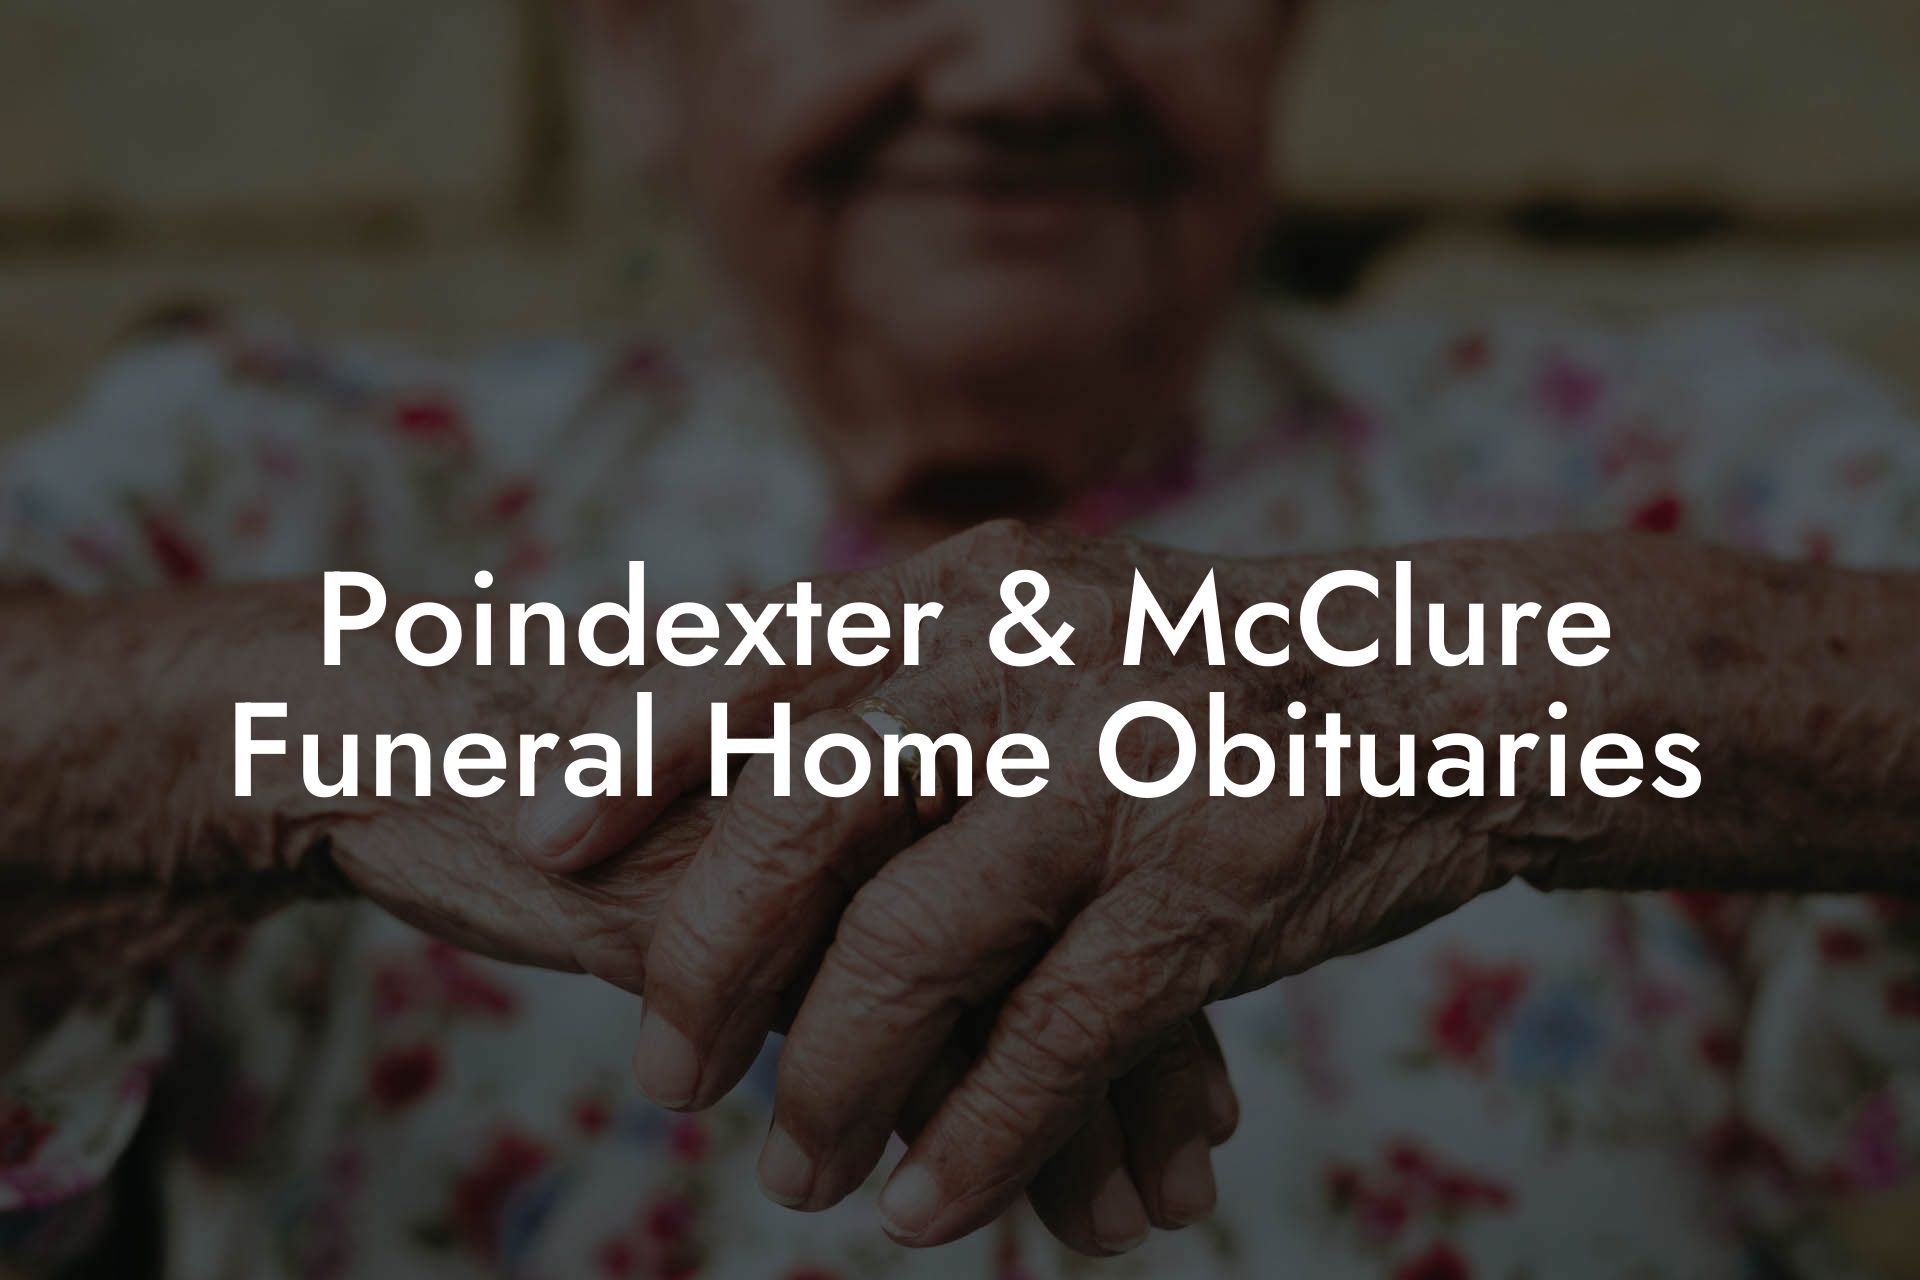 Poindexter & McClure Funeral Home Obituaries